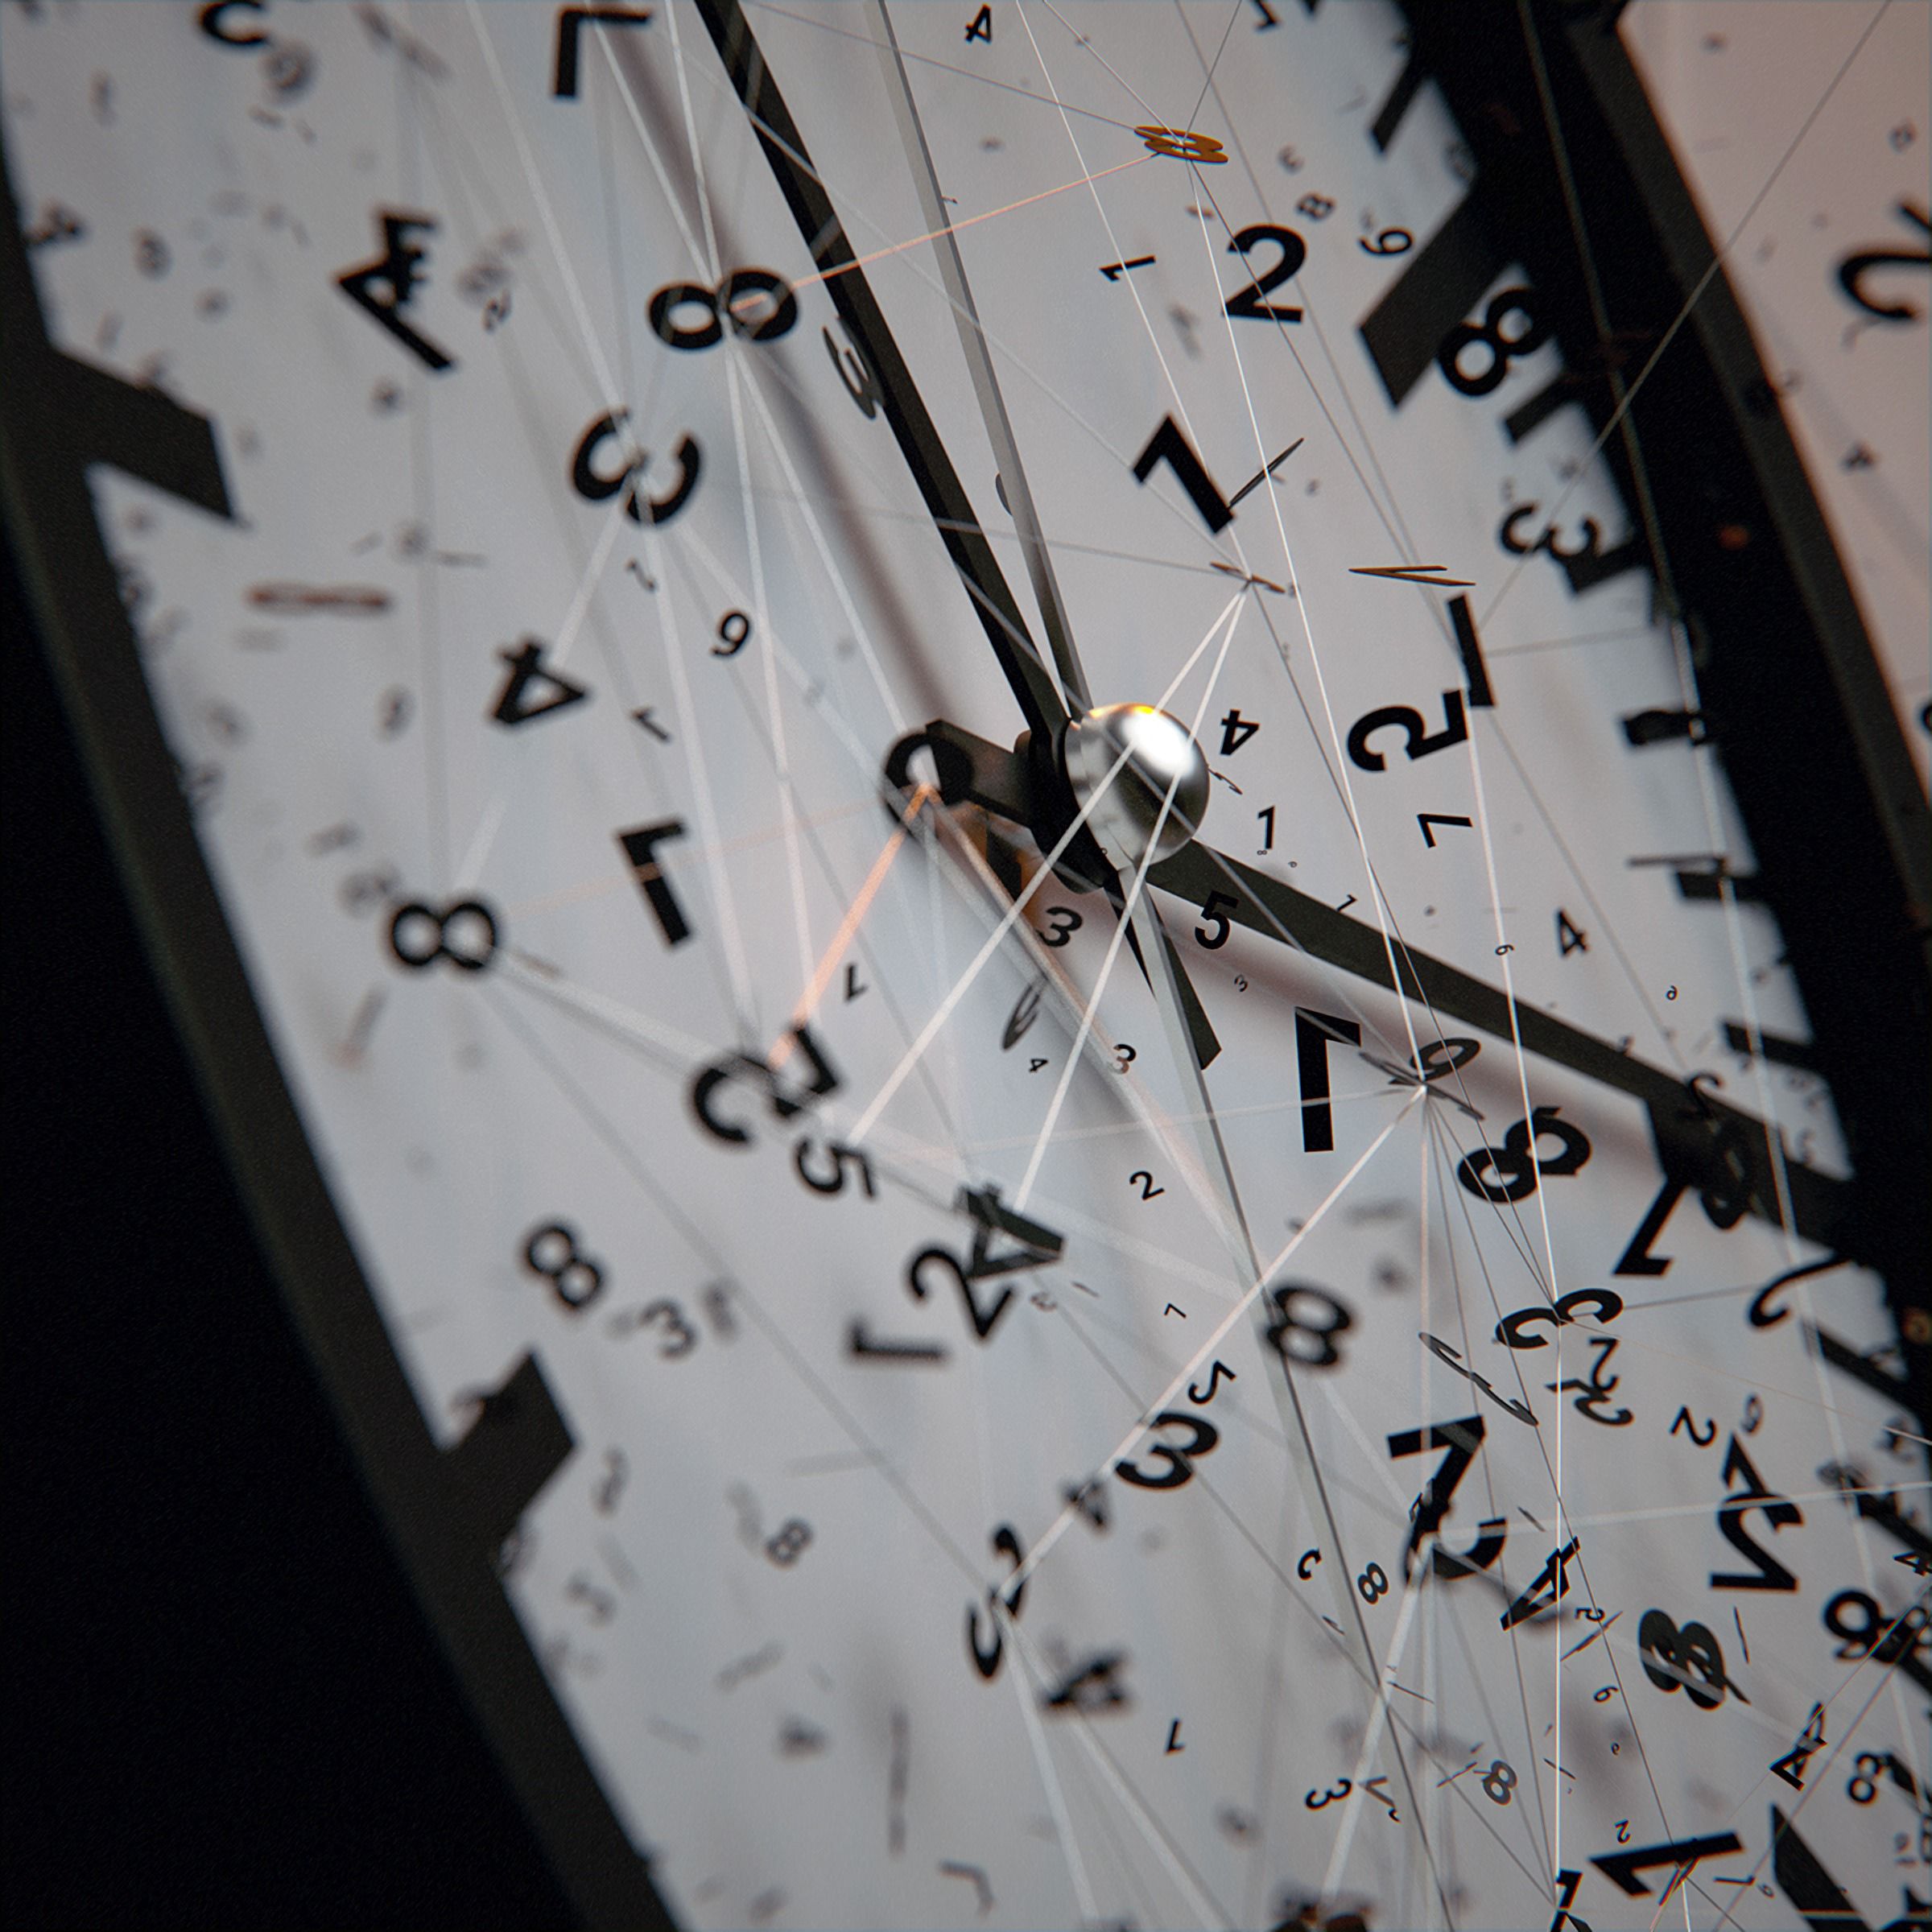 miscellanea, numbers, intricate, clock face, clock, dial, miscellaneous, lines, confused, arrows Full HD